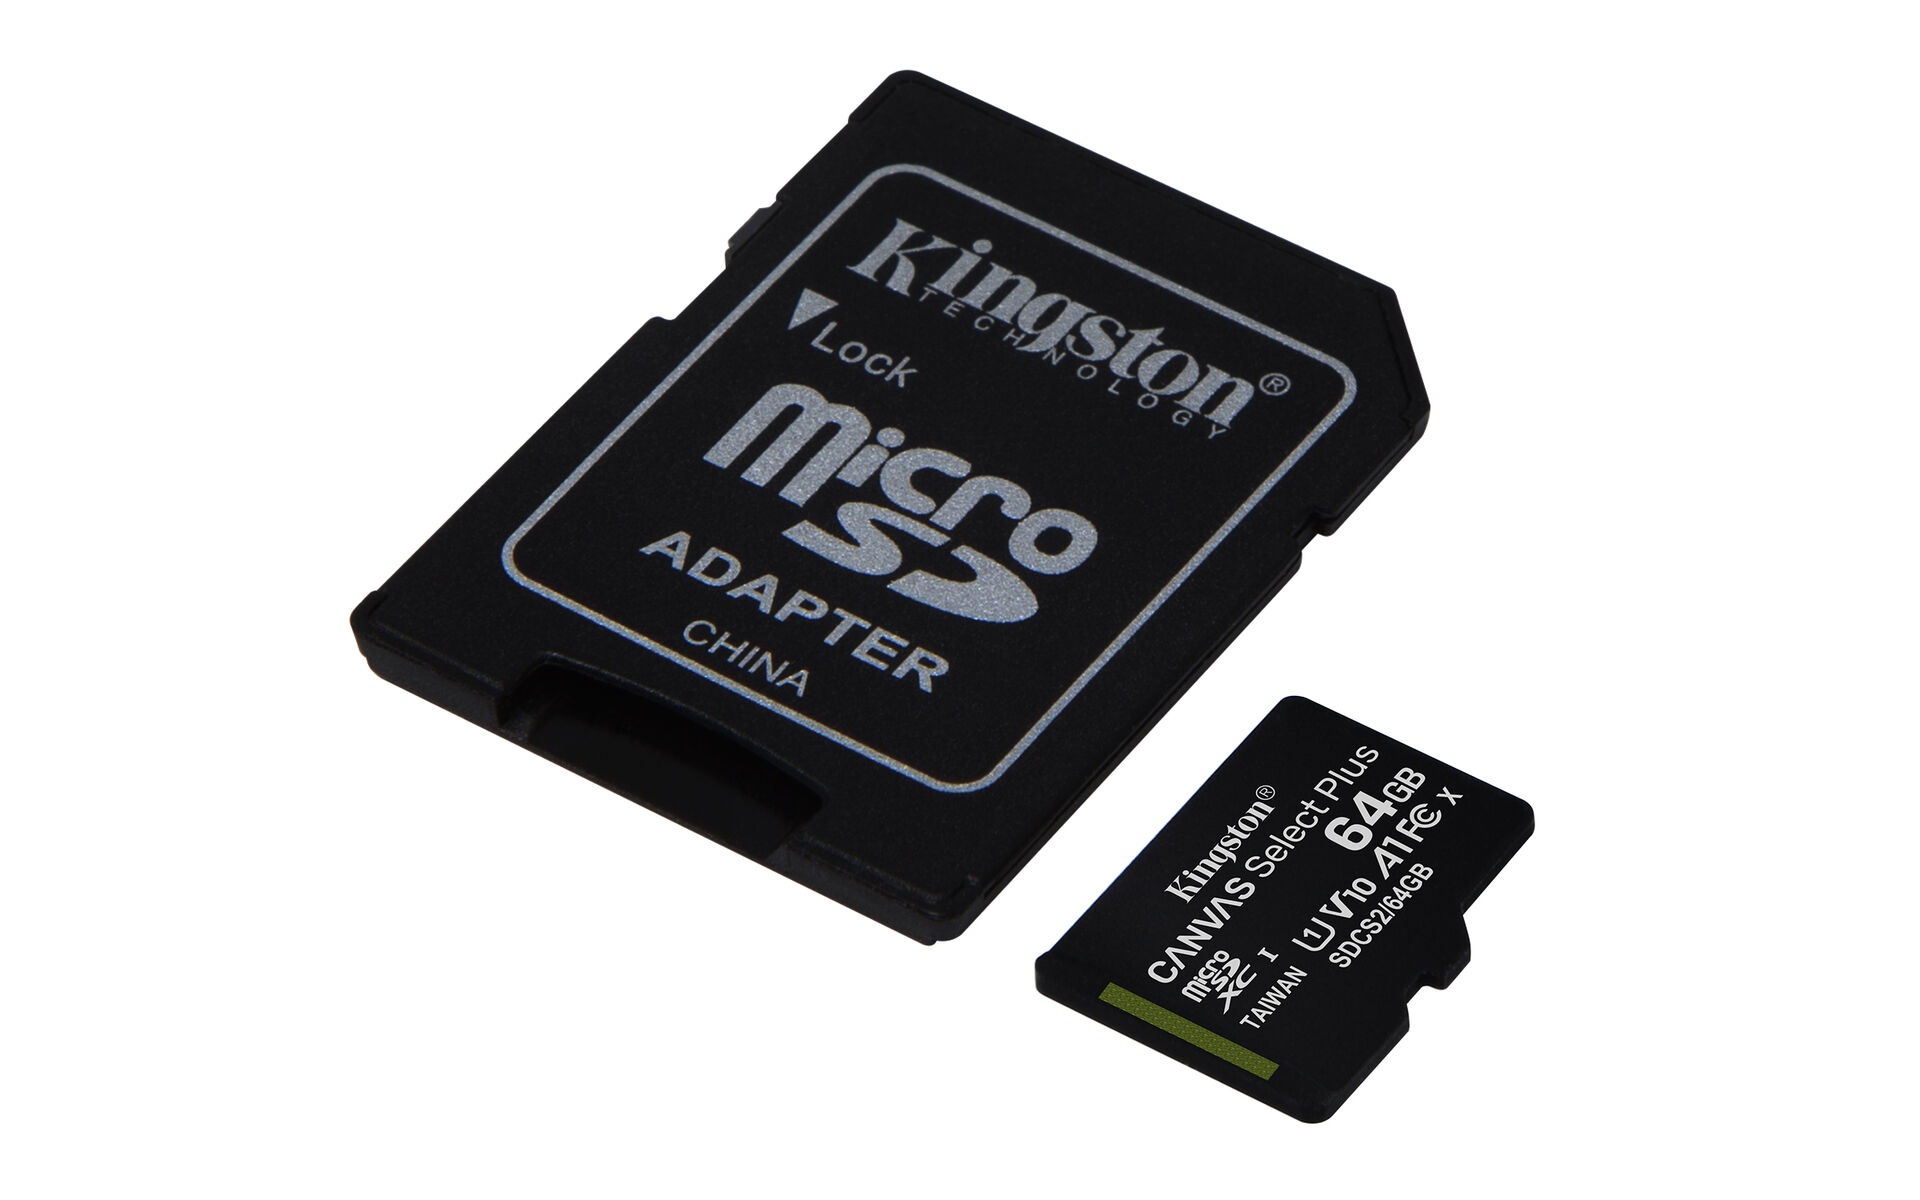 100MBs Works with Kingston Kingston 64GB Samsung W720NZKB MicroSDXC Canvas Select Plus Card Verified by SanFlash.